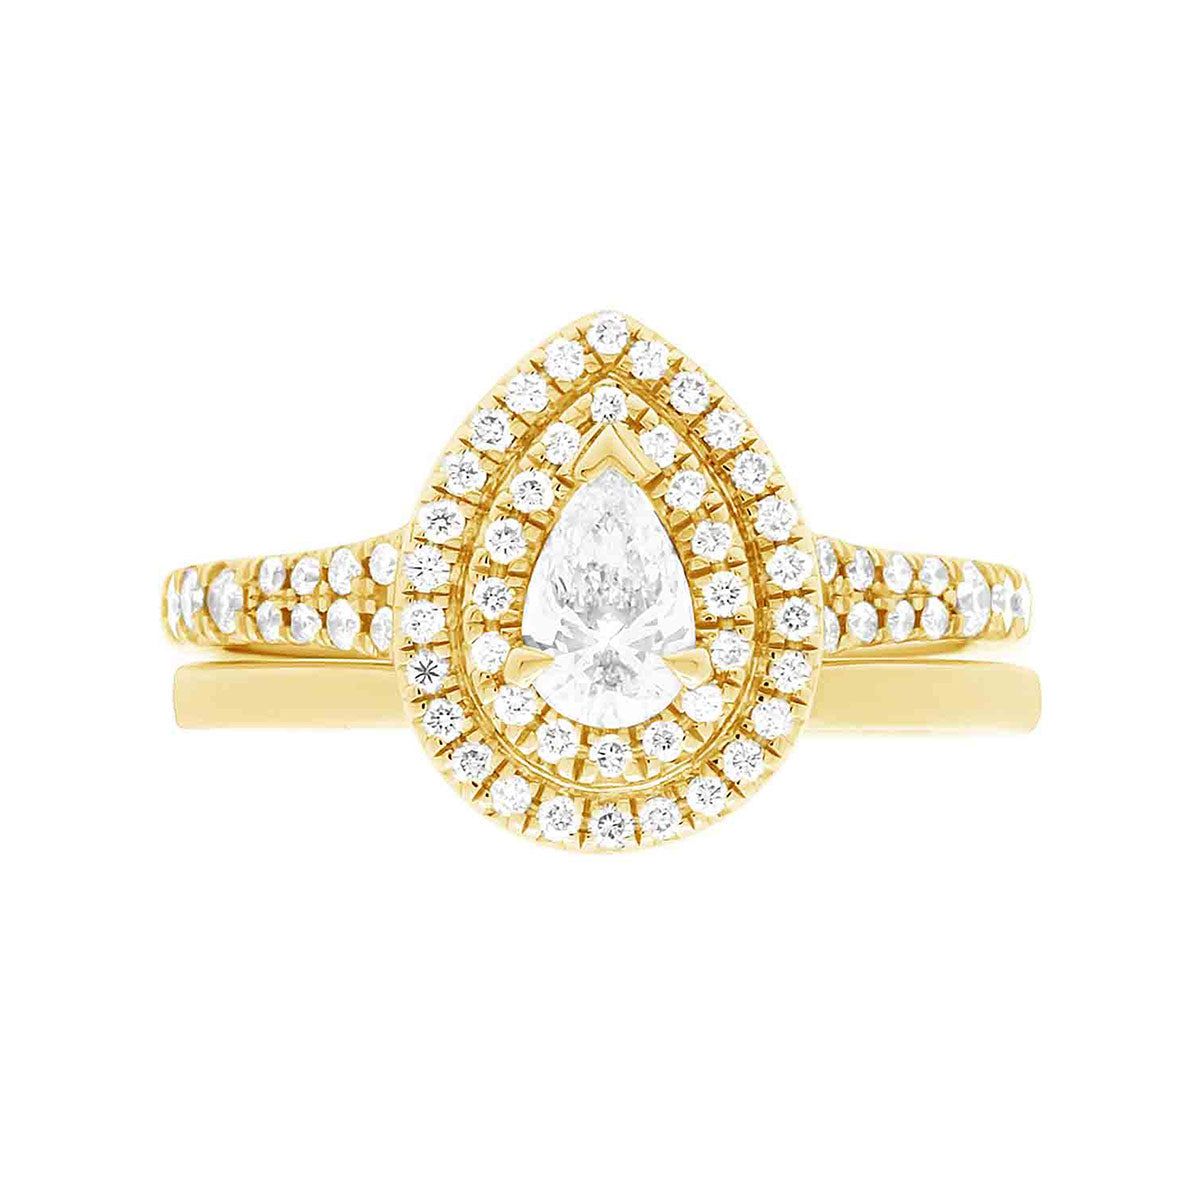 Double Halo Pear Diamond Ring in yellow gold pictured with a matching yellow gold wedding ring